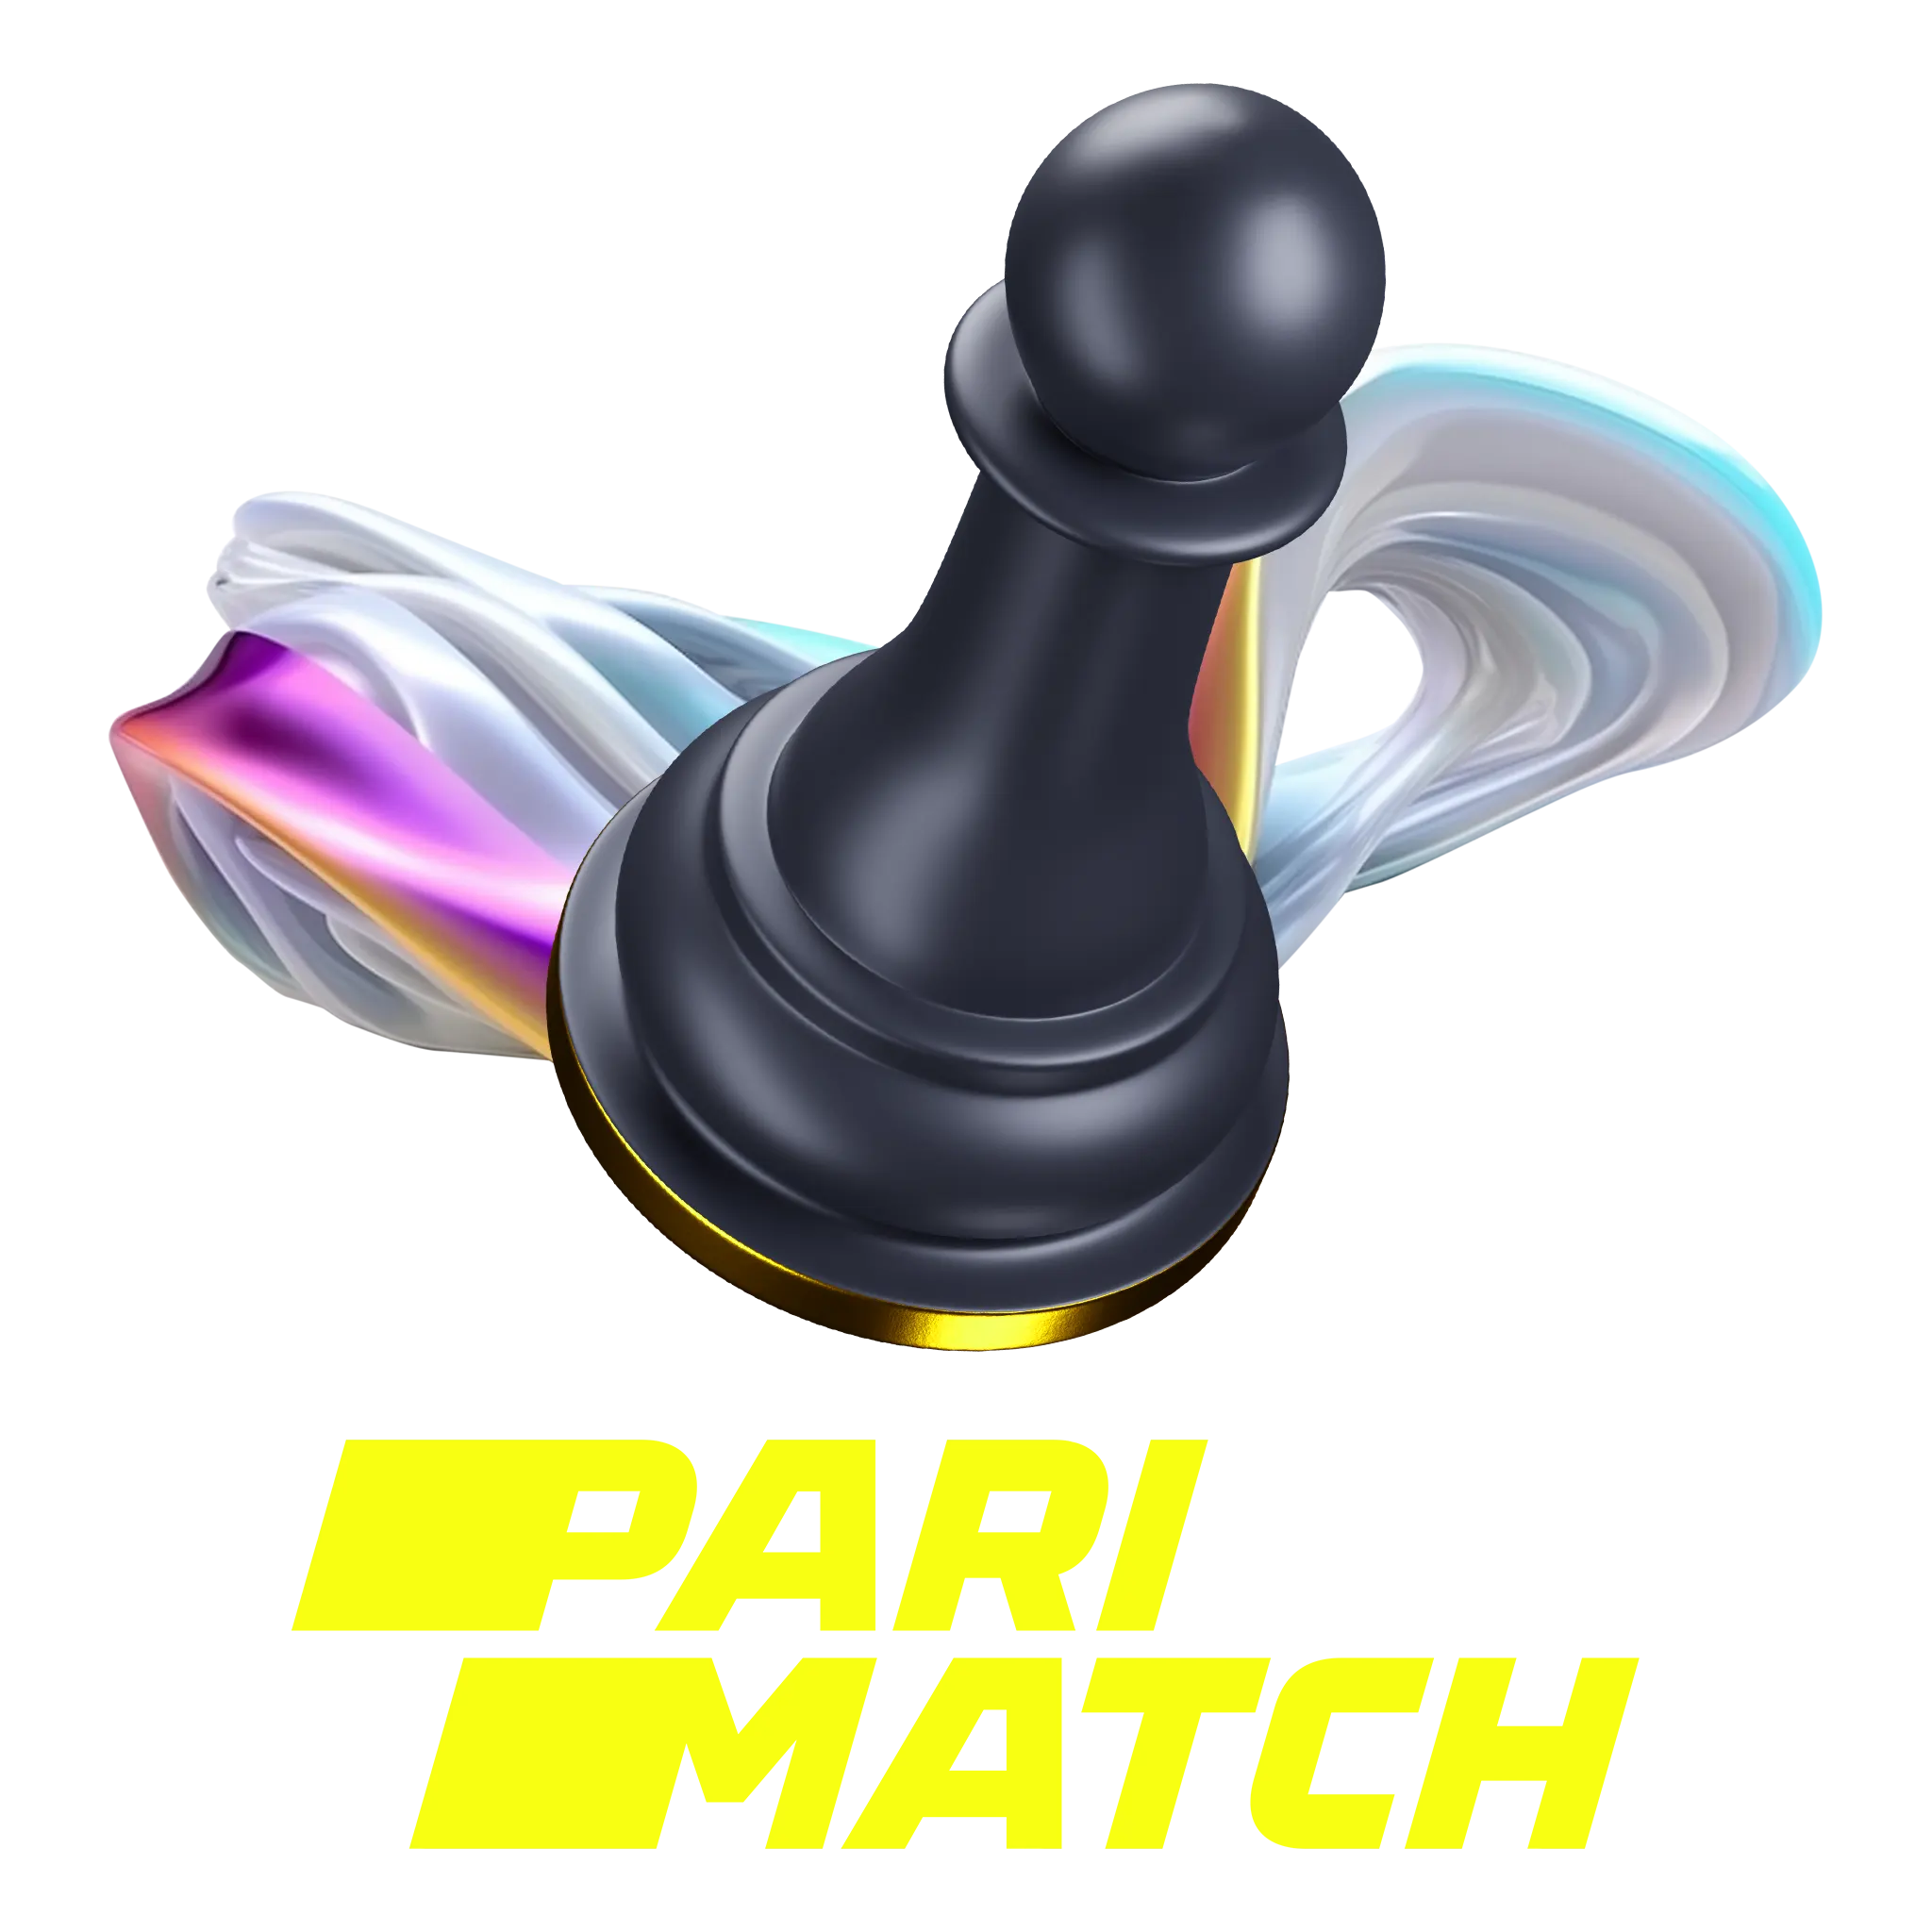 Start betting on chess games online with Parimatch!